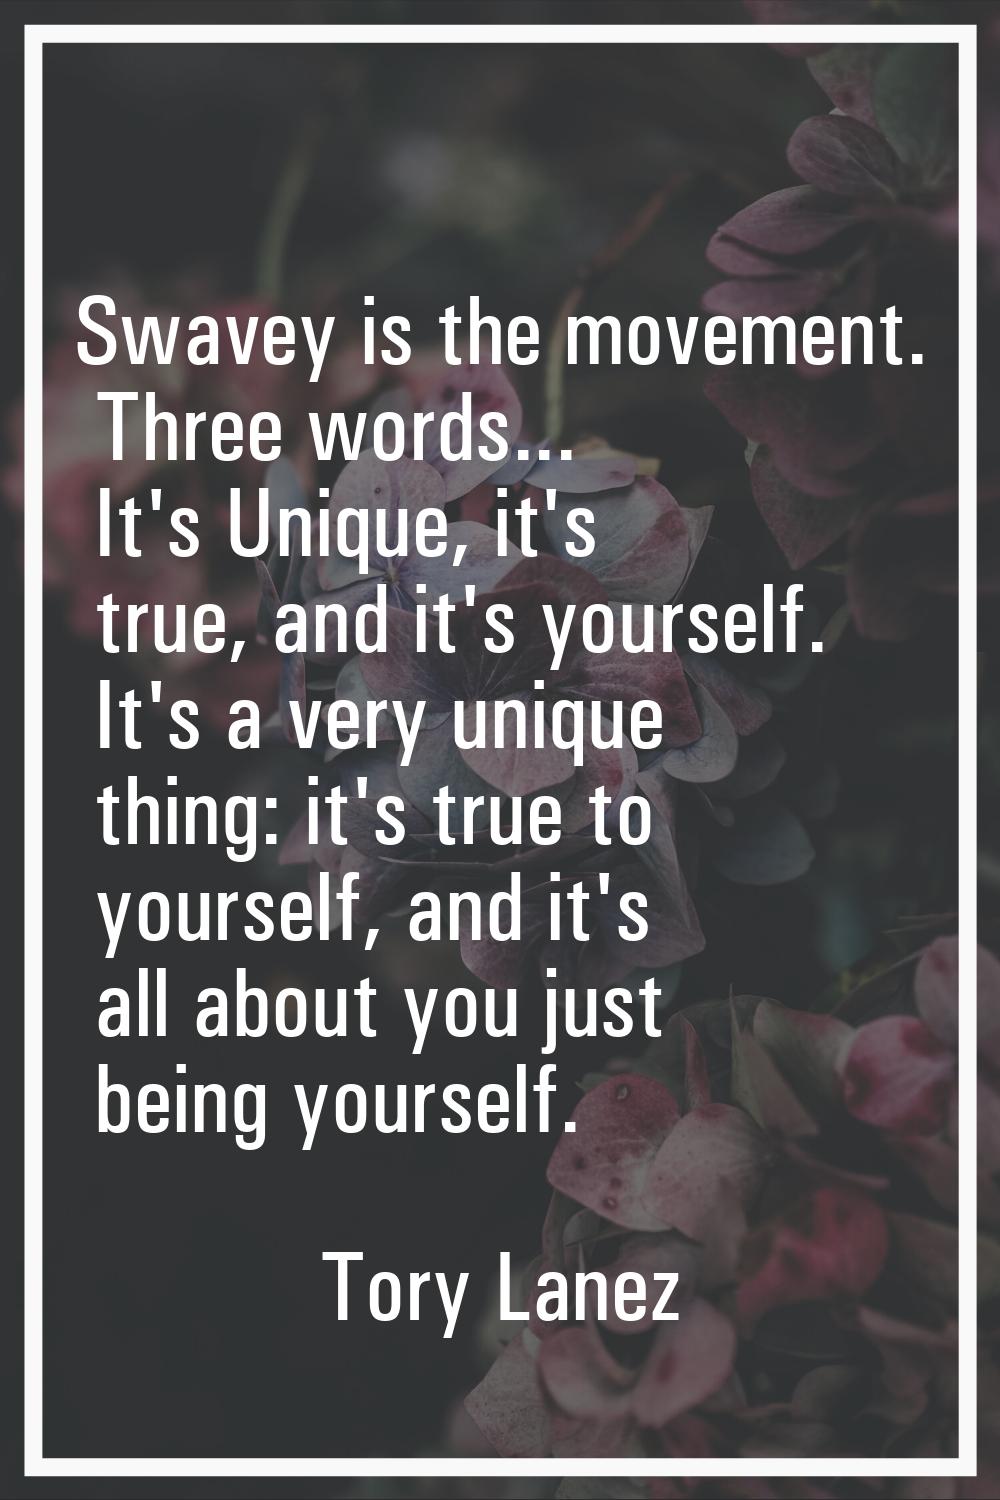 Swavey is the movement. Three words... It's Unique, it's true, and it's yourself. It's a very uniqu